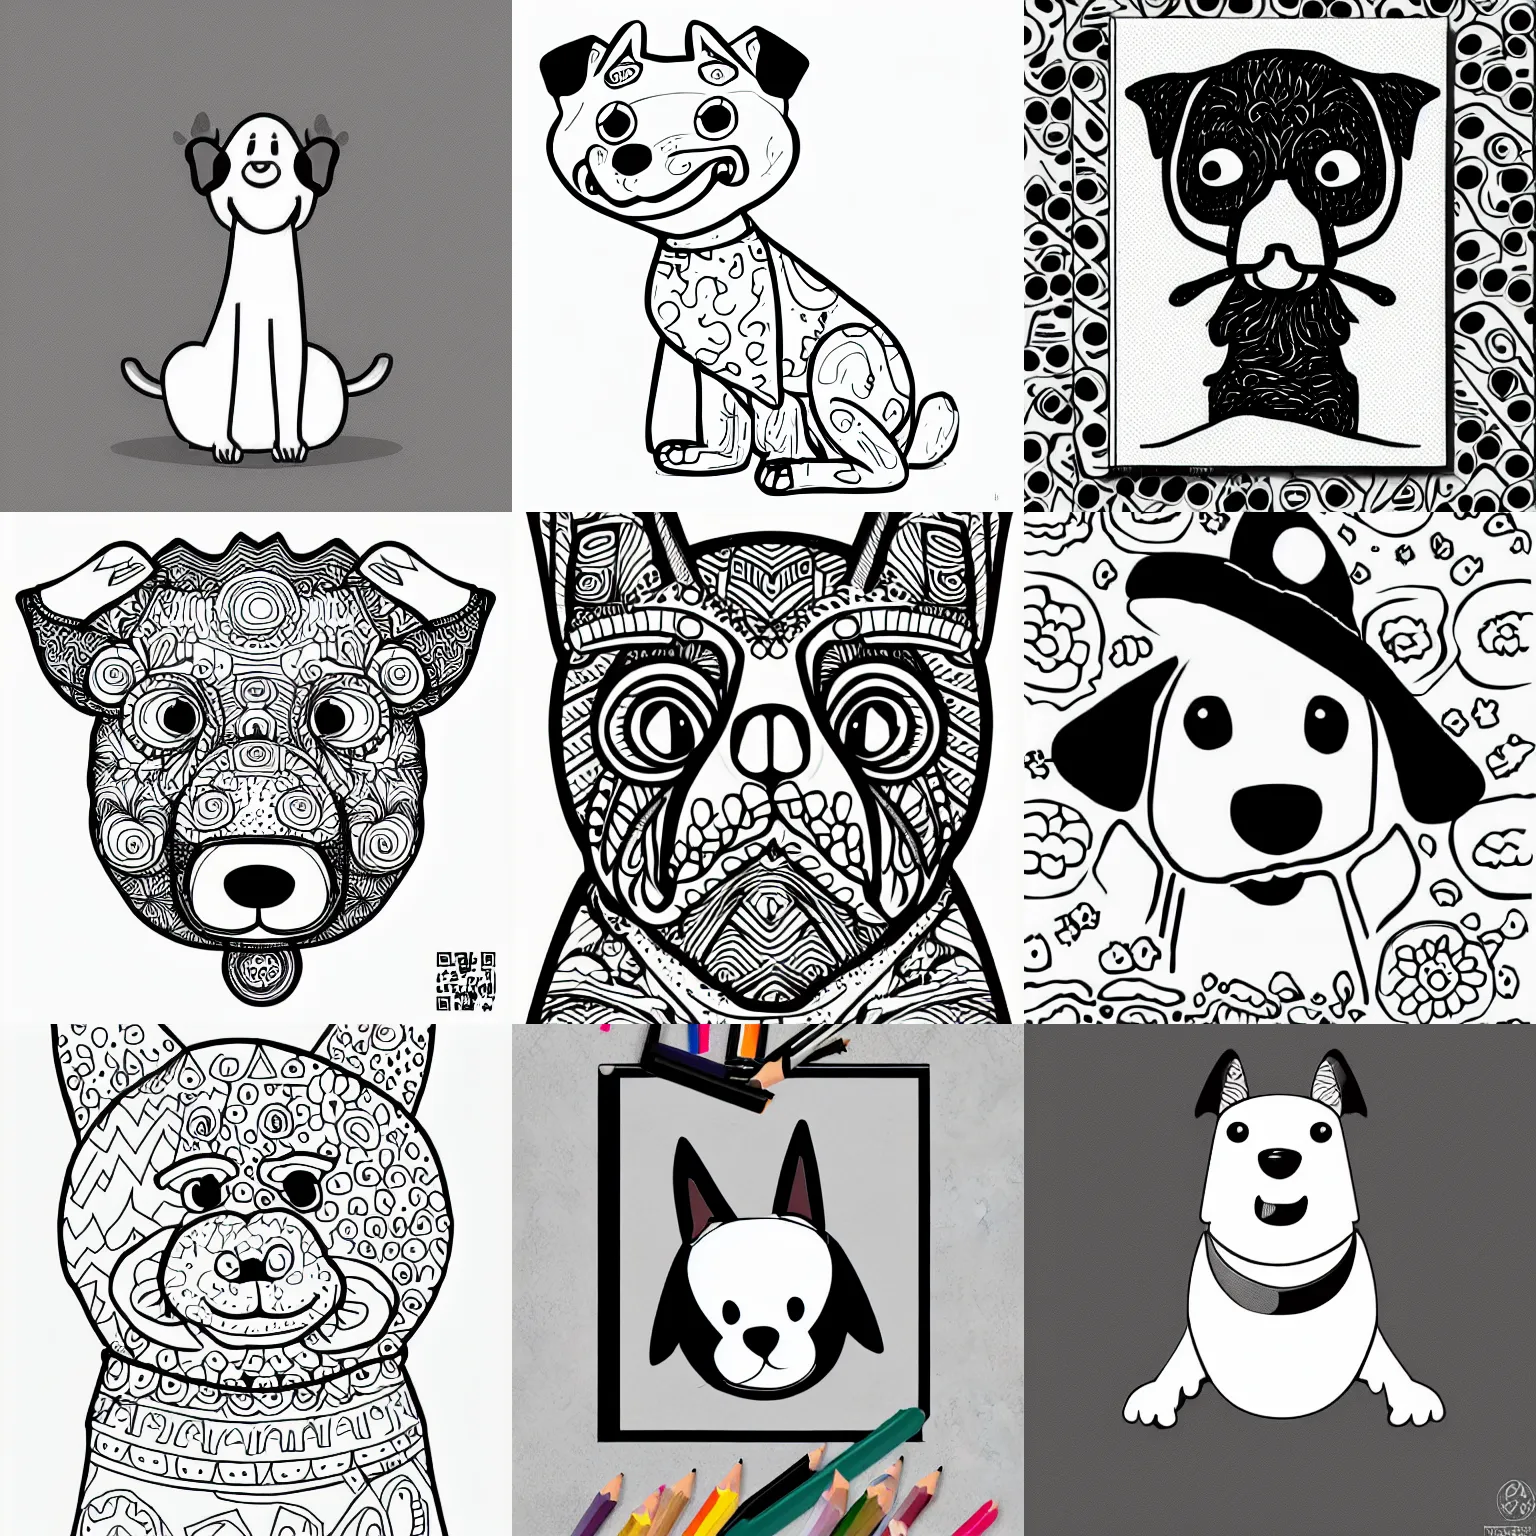 Prompt: funny dog illustration, coloring page, simplified black line art on white background, black and white, behance, devianart, artstation, dribble, creary, ello, cgsociety, drawcrowd, pixiv, concept art world, our art corner, newgrounds, doodle addicts, penup